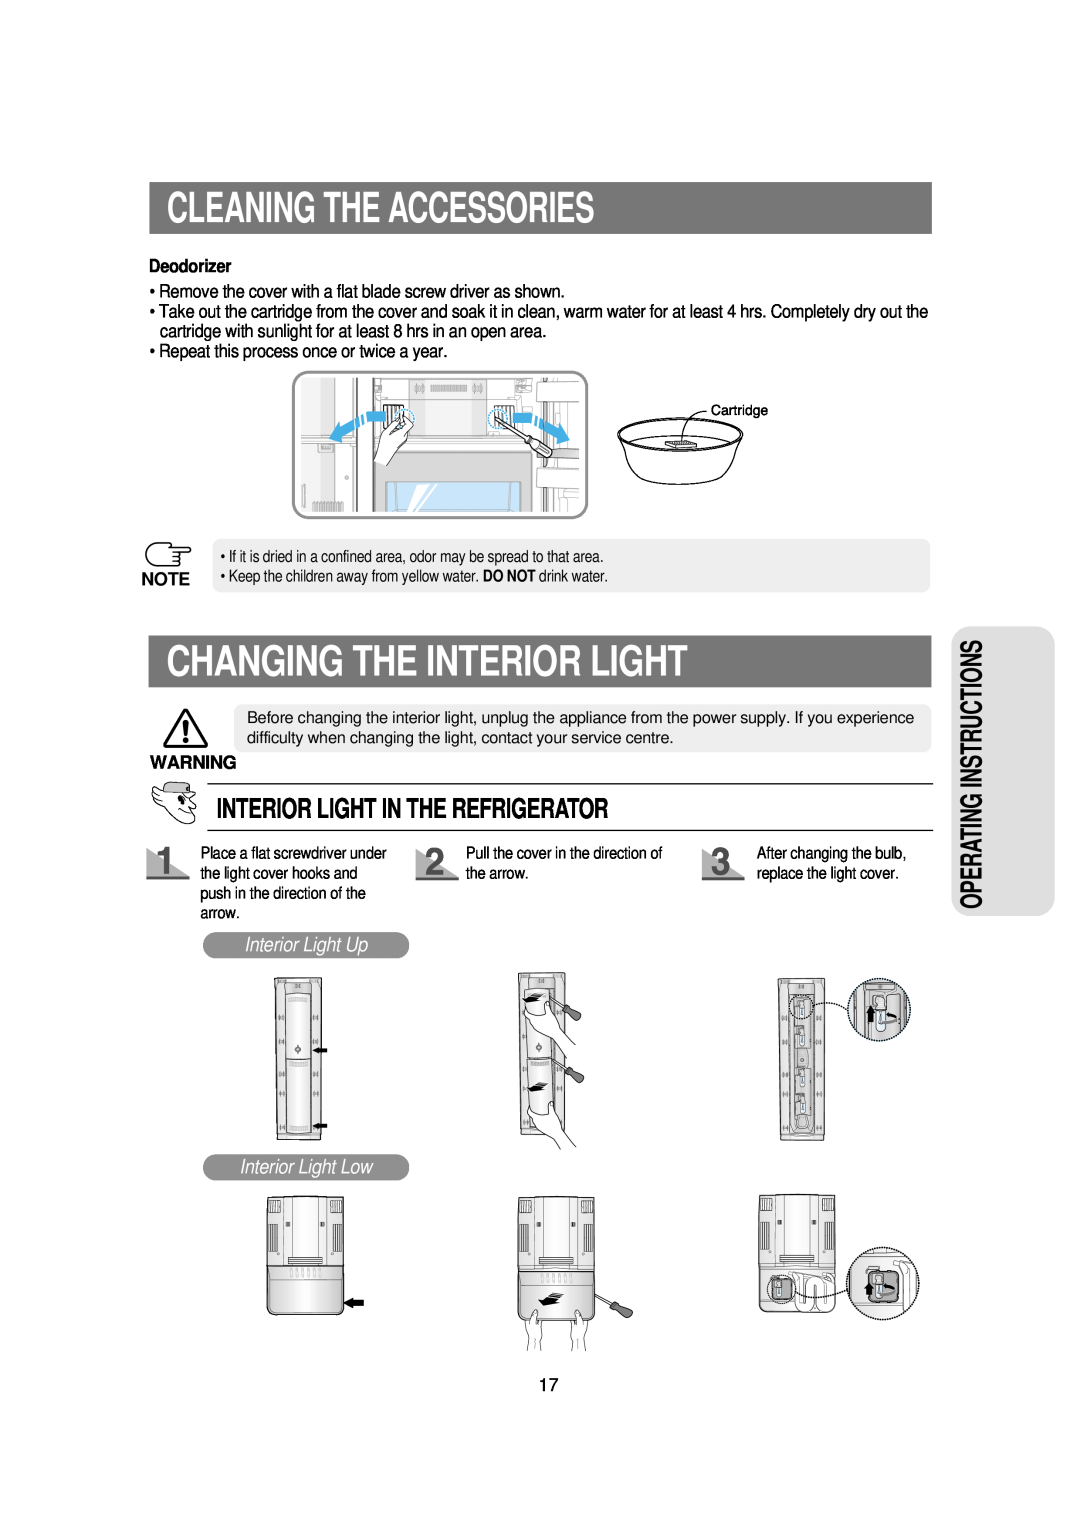 Samsung RSE8N, RSE8F Changing The Interior Light, Interior Light In The Refrigerator, Deodorizer, Cleaning The Accessories 